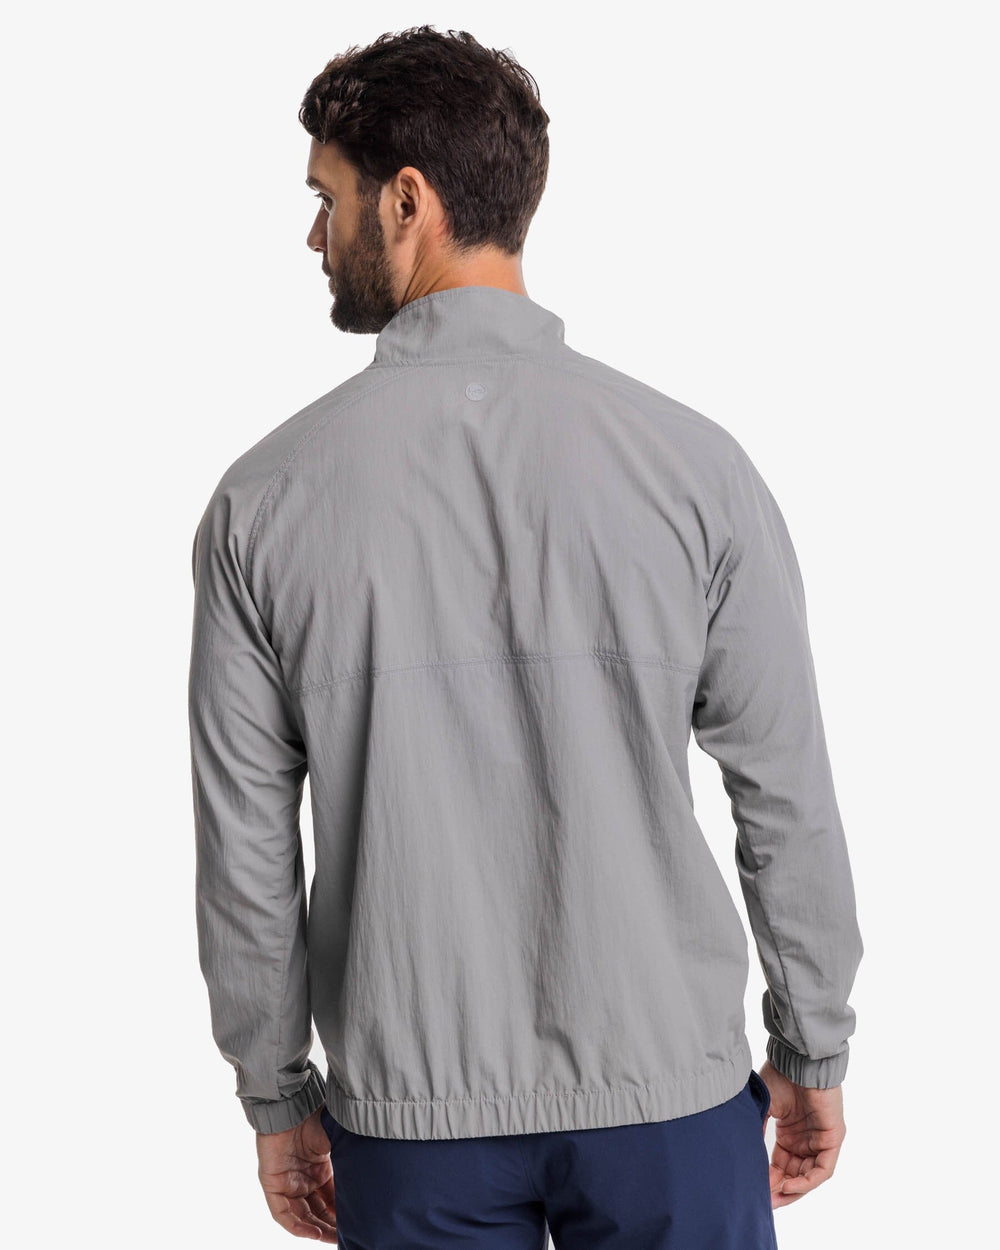 The back view of the Southern Tide Shoreline Performance Pullover by Southern Tide - Frost Grey